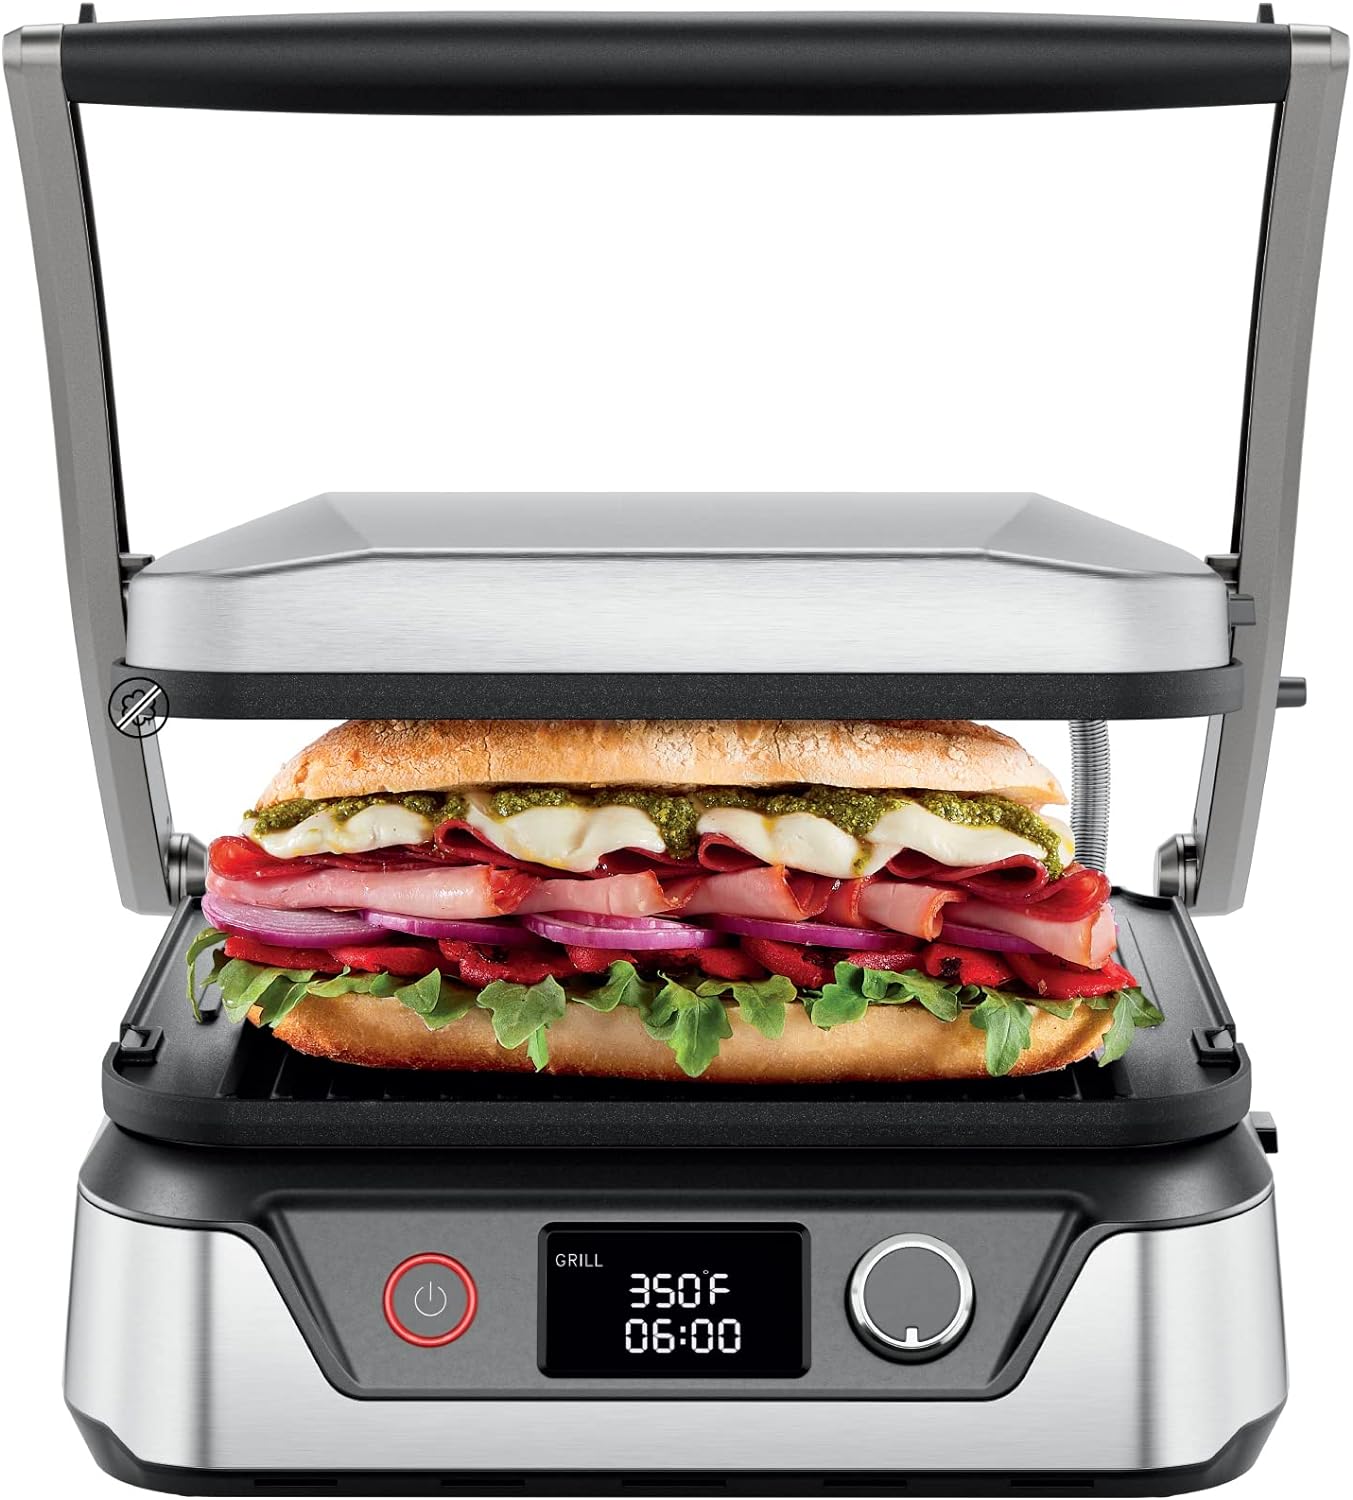 Chefman 5 in 1 Panini Press Grill with Reversable Non-Stick Plates, Opens Flat - Stainless Steel, New